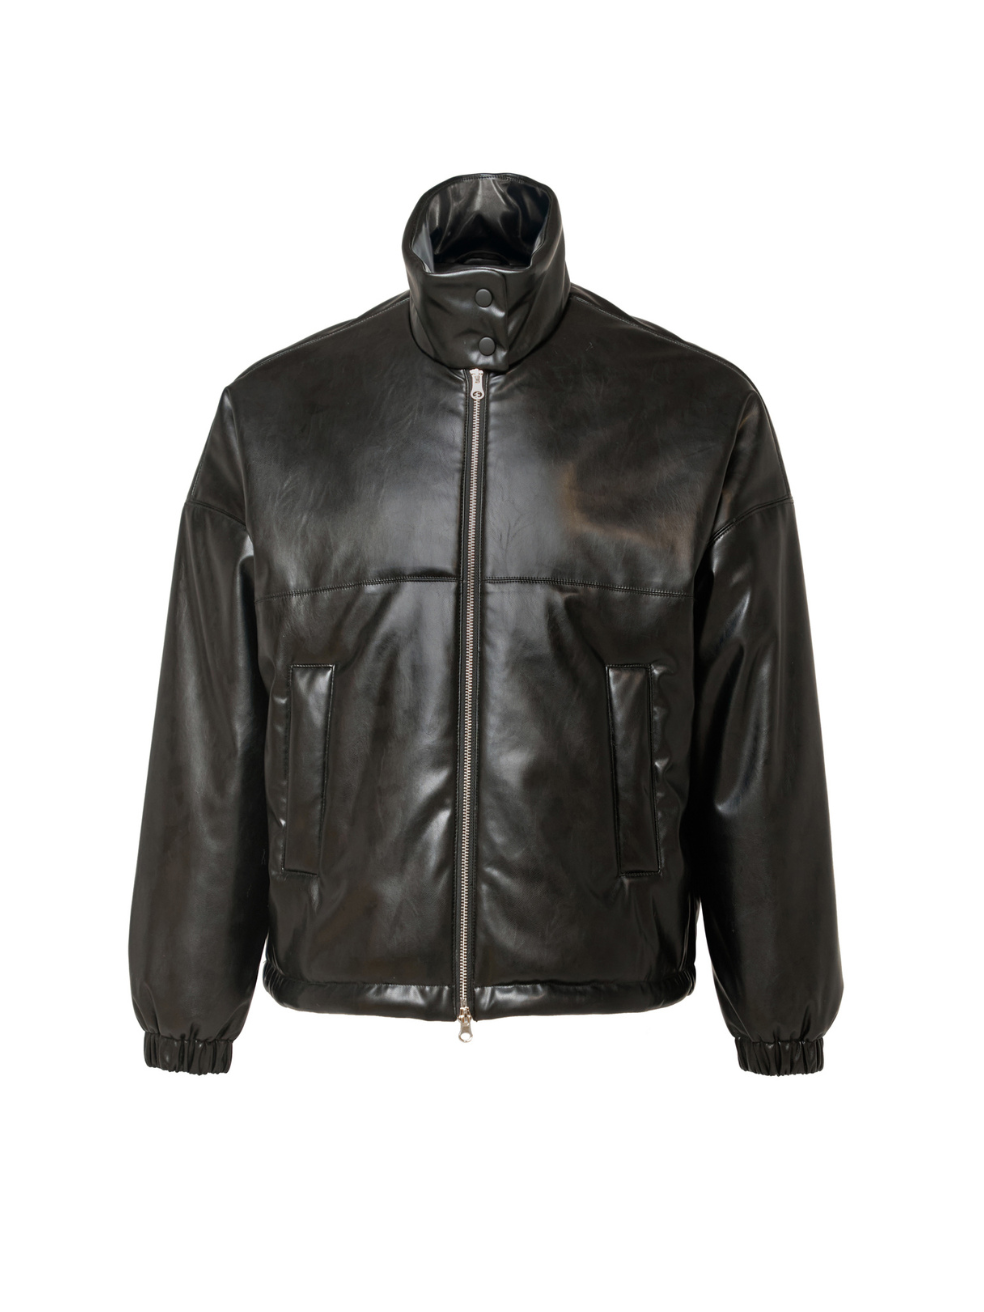 Billy Stormi Black Canadian Made Luxury Outerwear Vegan Leather Cropped Bomber Jacket